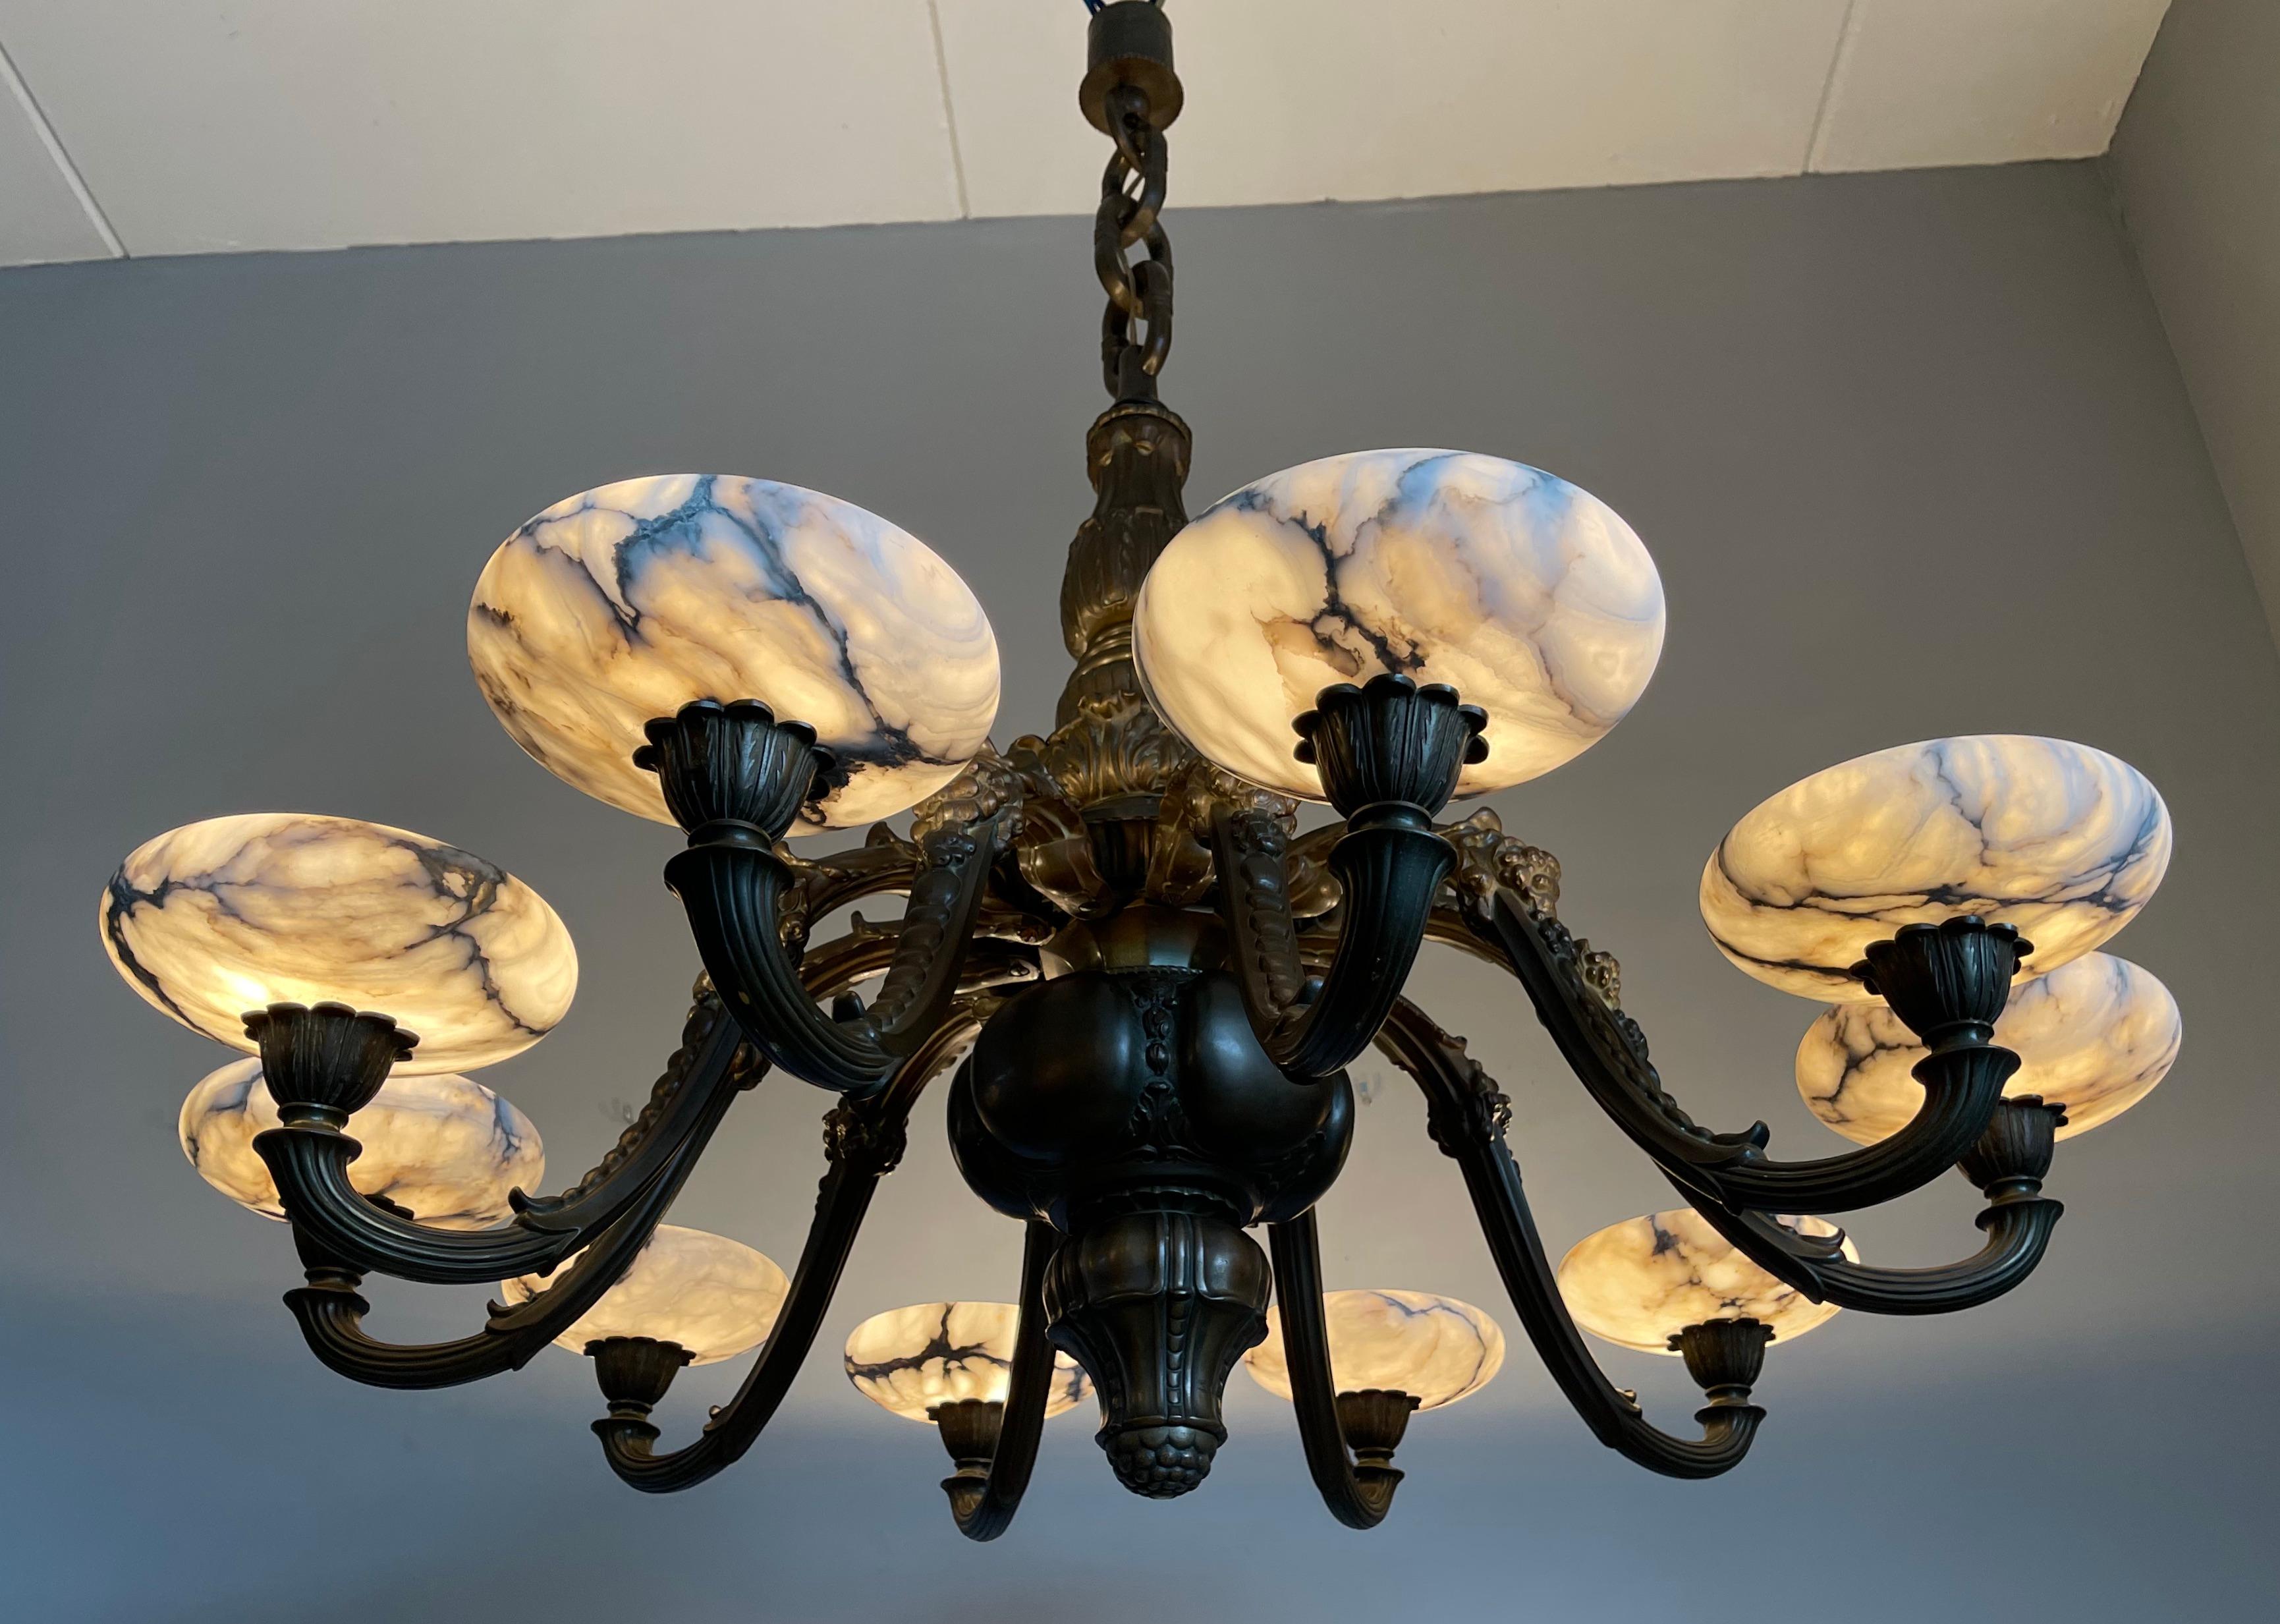 Stunning and top quality crafted bronze and alabaster pendant light.

When you are looking for an extra large and truly remarkable chandelier for yourself or for one of your clients then this light should be on your short list. This European